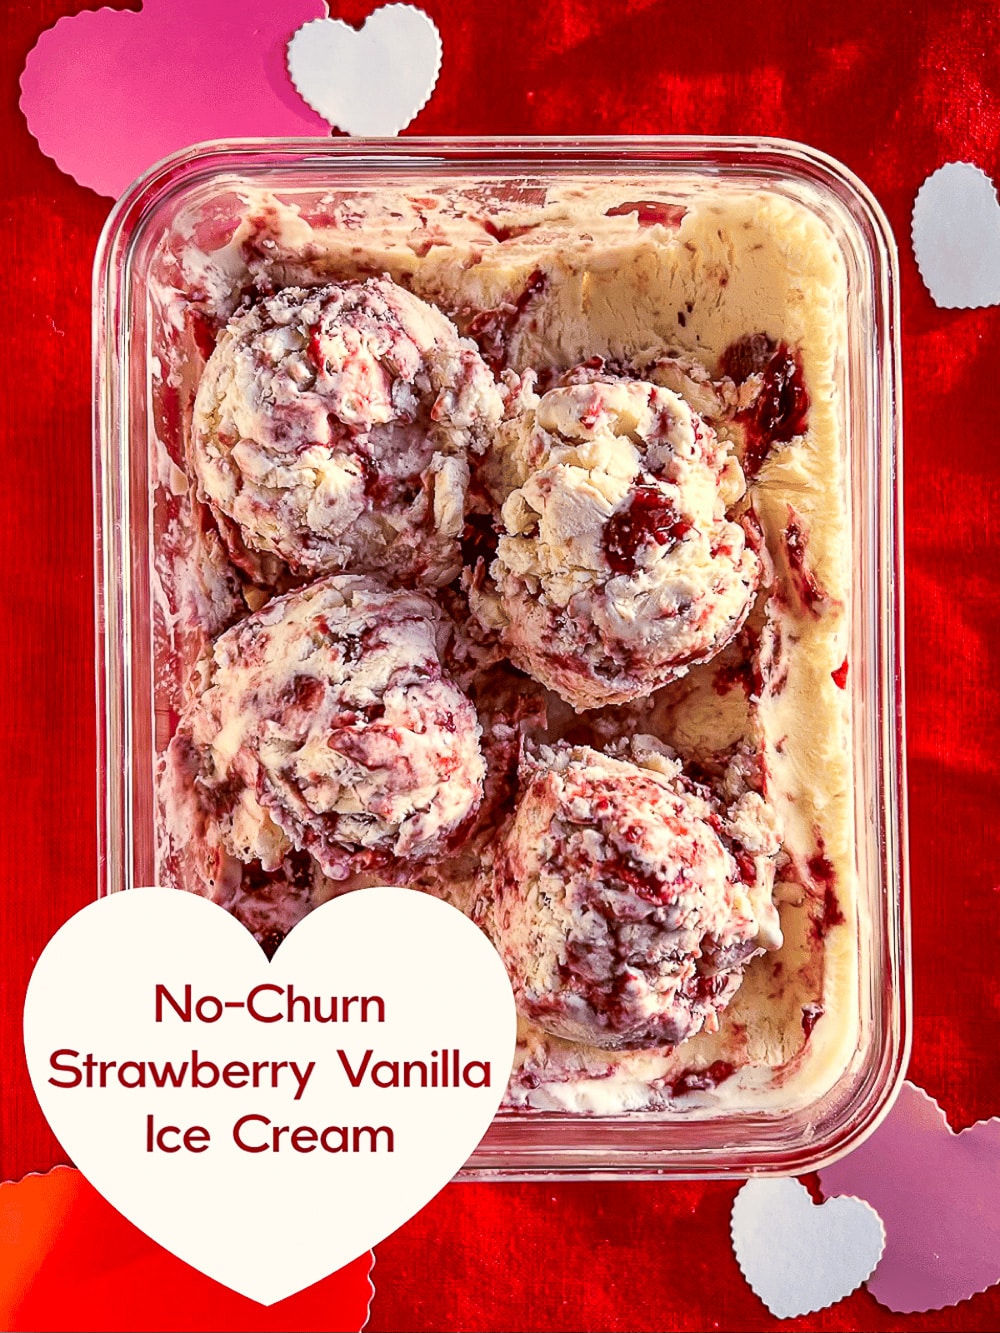 No Churn Strawberry Vanilla Ice Cream with title text added for Pinterest